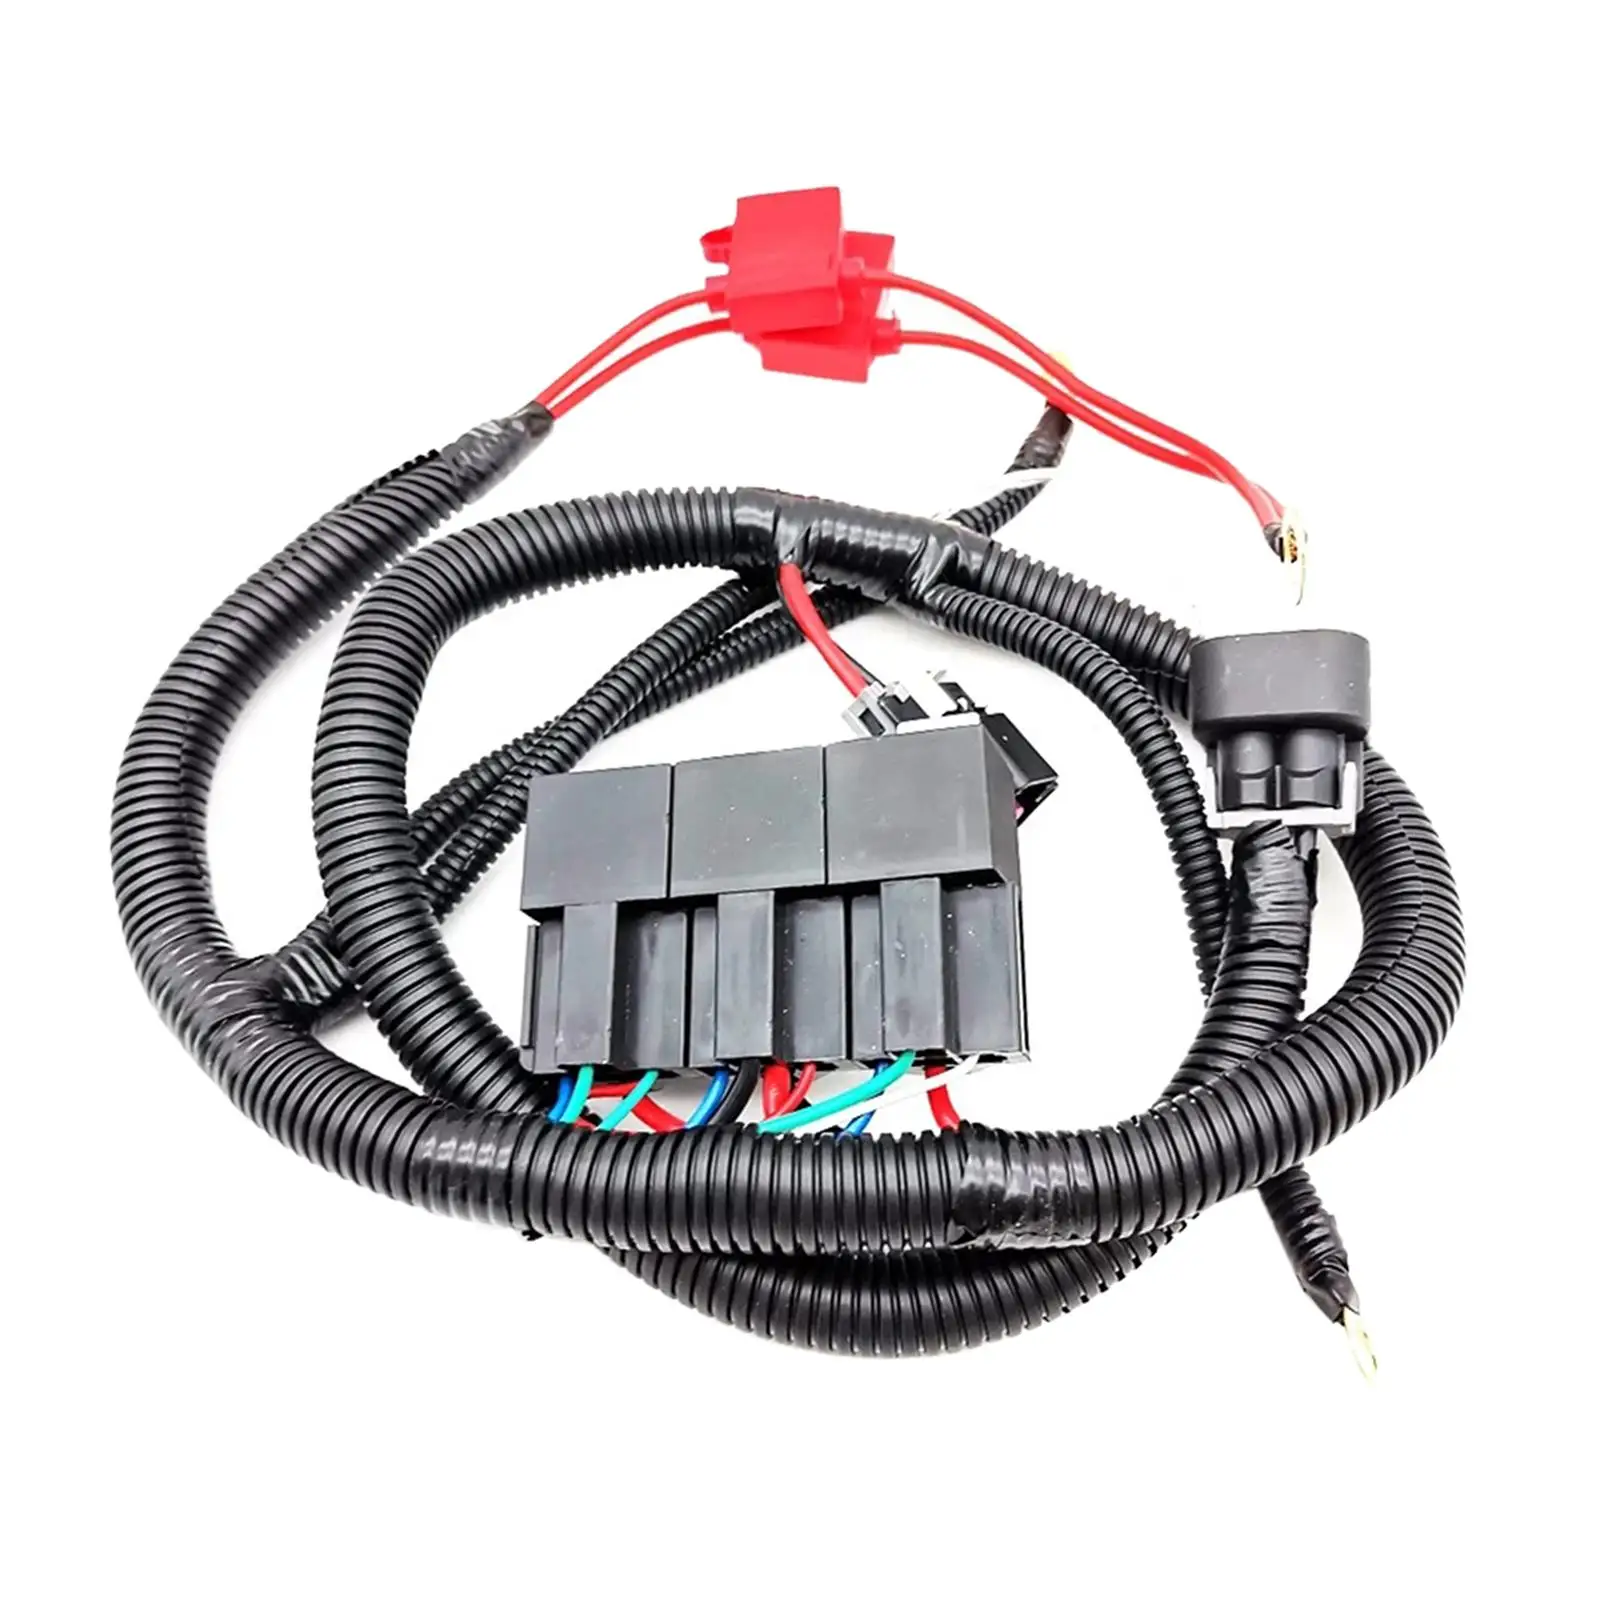 Electric Dual Fan Upgrade Wiring Harness 7L5533A226T for GM 1999?2006 High Reliability Stable Performance Easy Installation